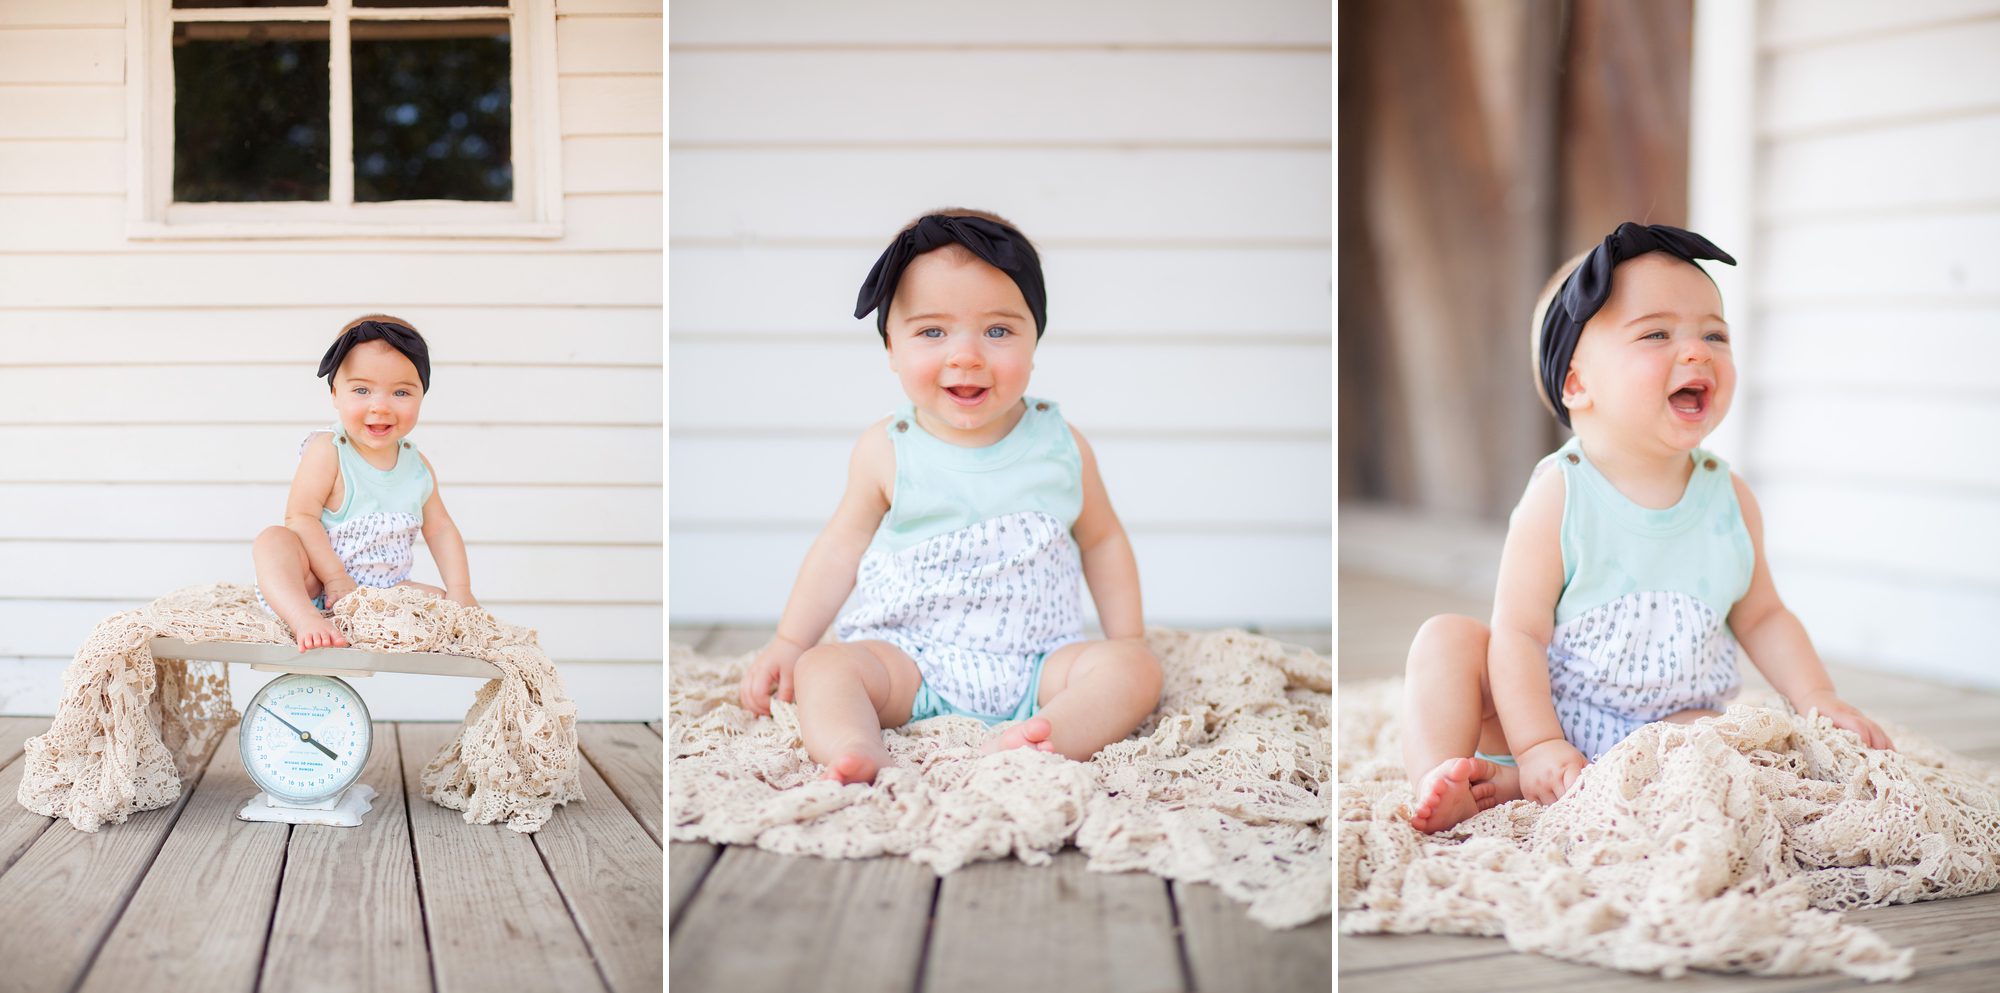 6 month old Collins at her photography shoot in Murfreesboro TN, photo by Krista Lee Photography